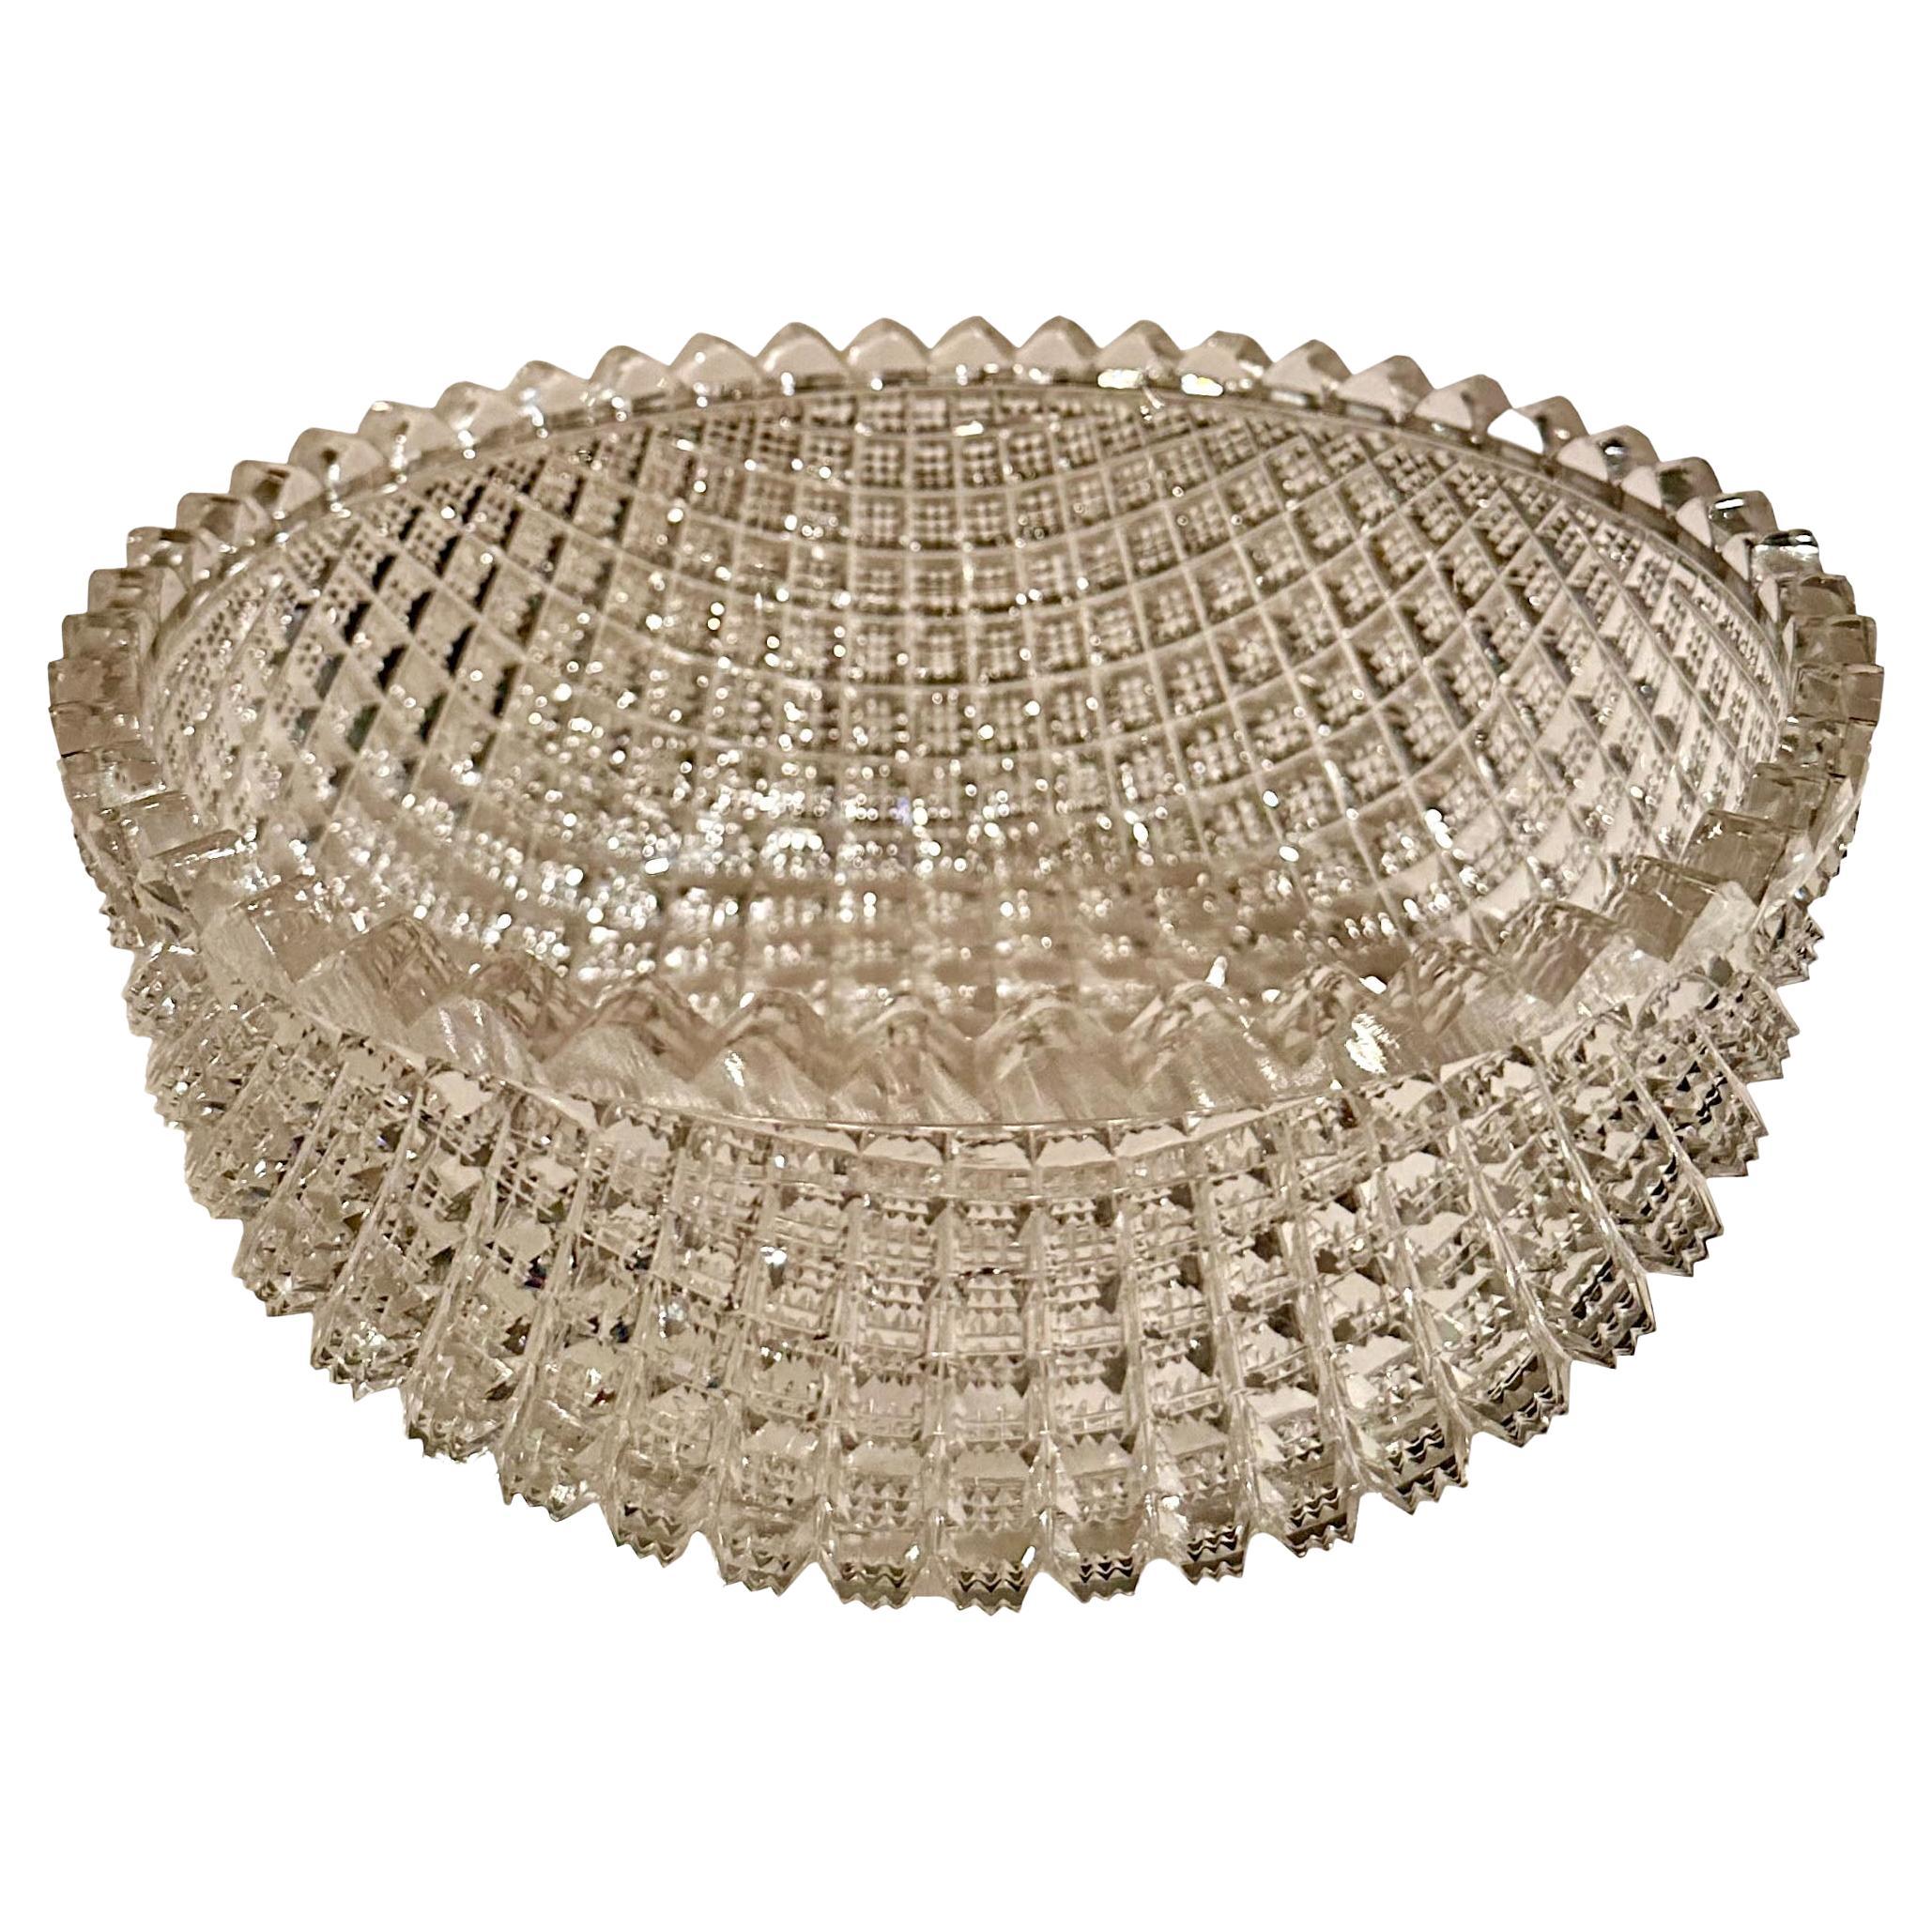 American turn of the century brilliant period cut glass bowl. It is heavily cut and carved and very faceted in a draped pattern.